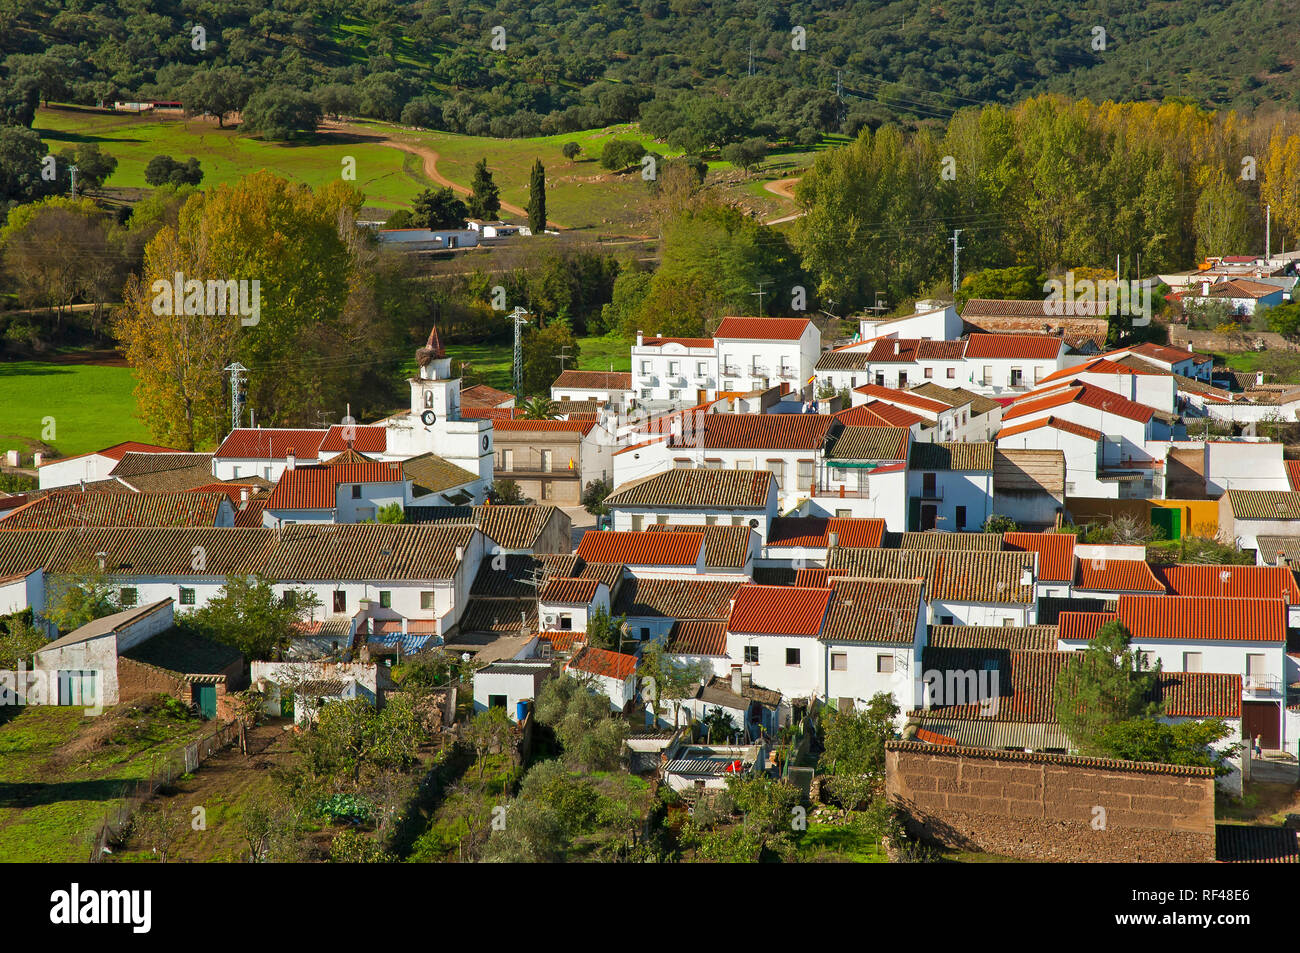 San nicolas del puerto hi-res stock photography and images - Alamy